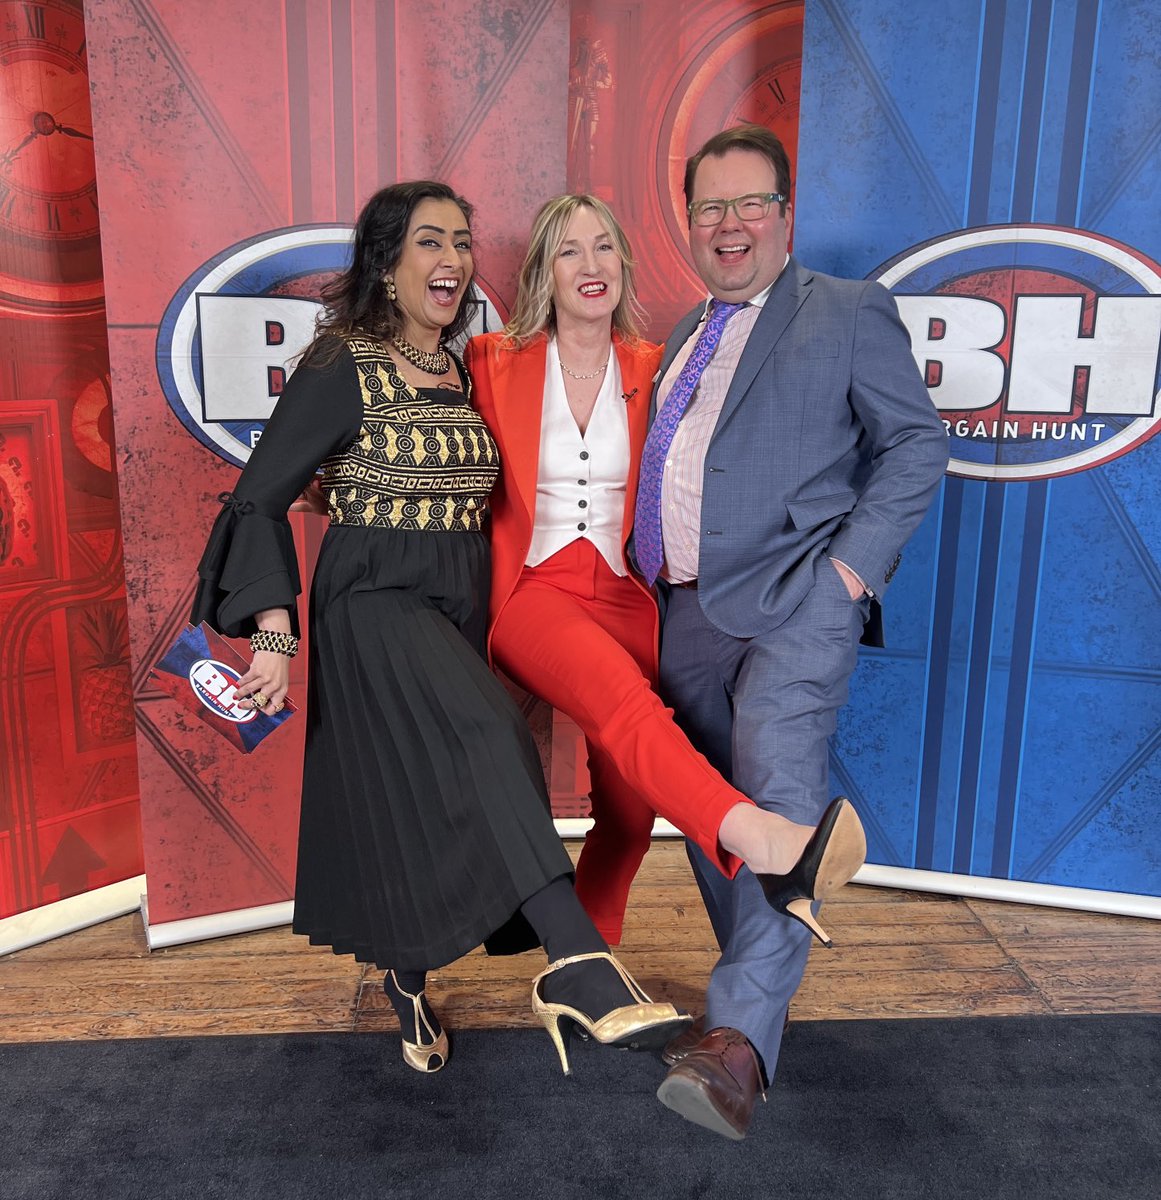 That’s a wrap! #Belfast you’ve been amazing! ⁦@BBCBargainHunt⁩ ⁦@RooIrvine⁩ Thomas Forrester #untilthenexttime #lovemyjob